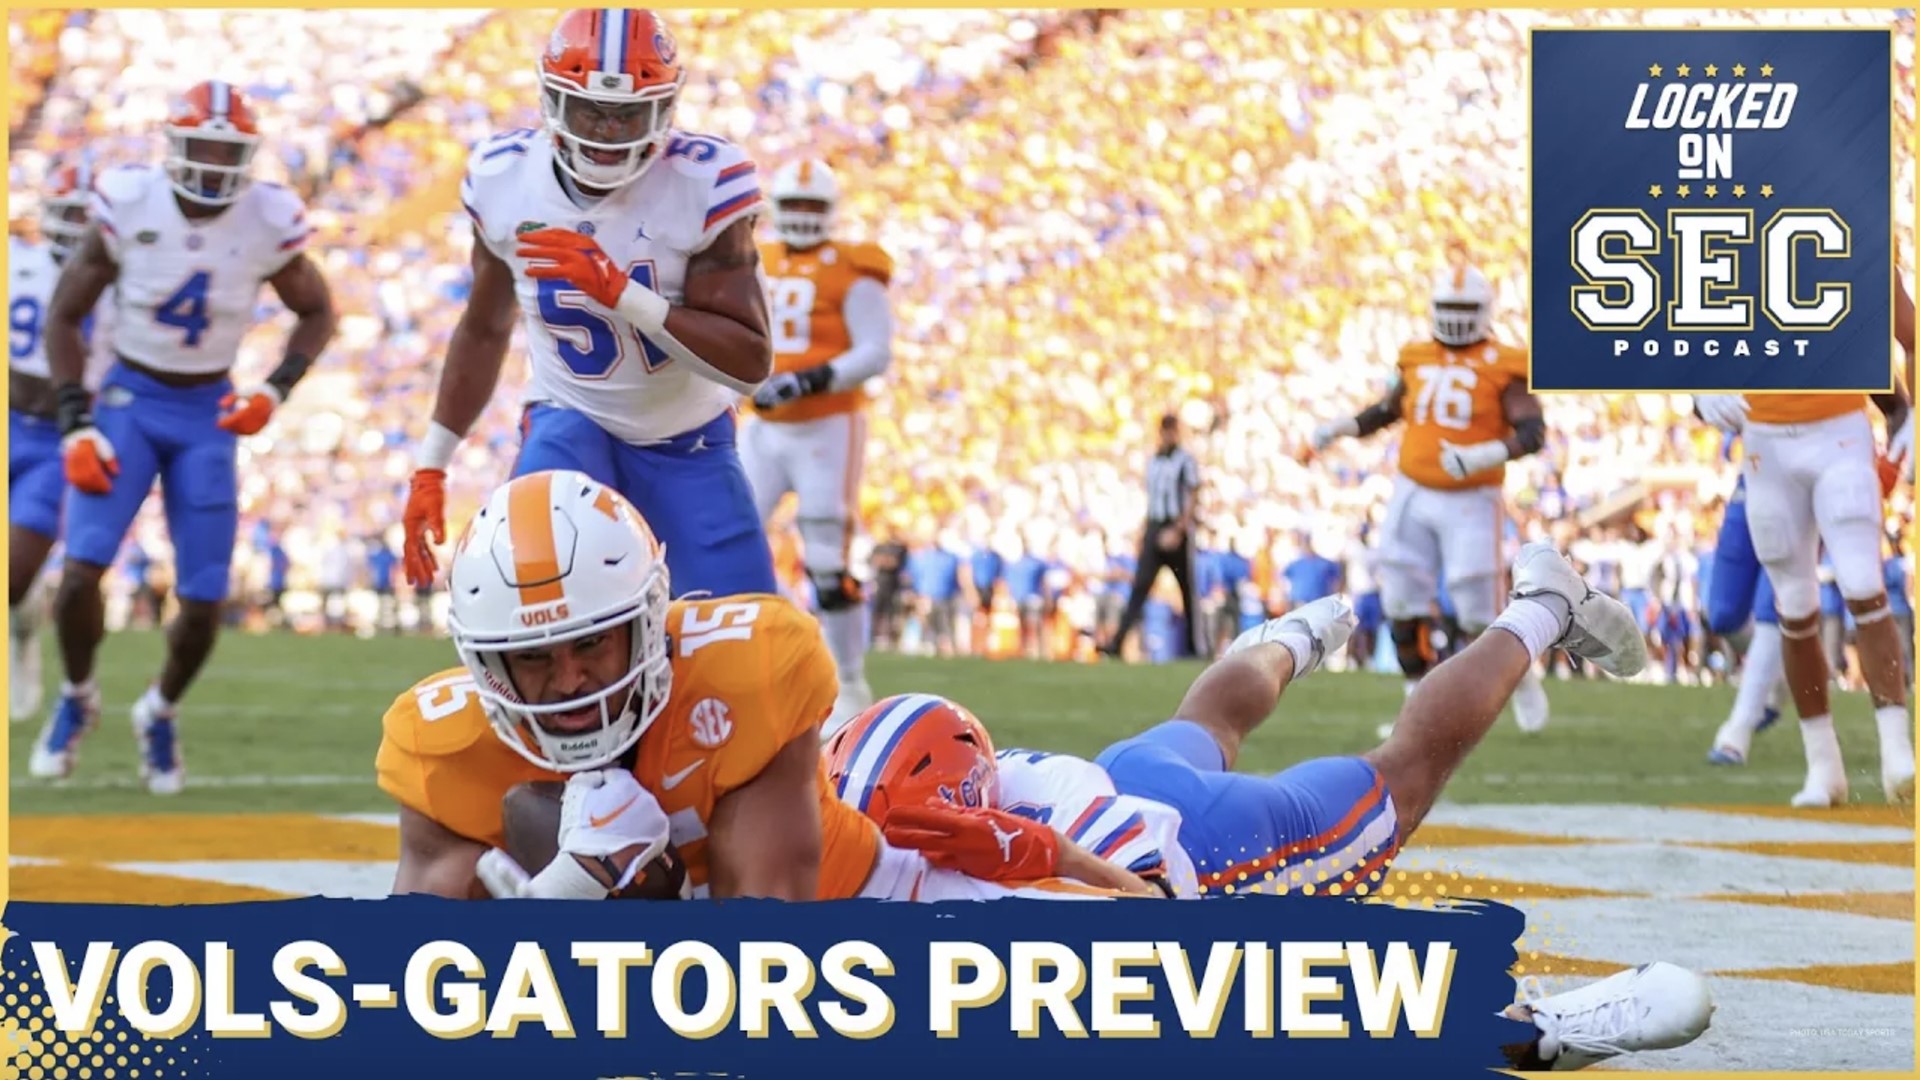 We dive into the highly anticipated matchup between the Florida Gators and the Tennessee Volunteers.